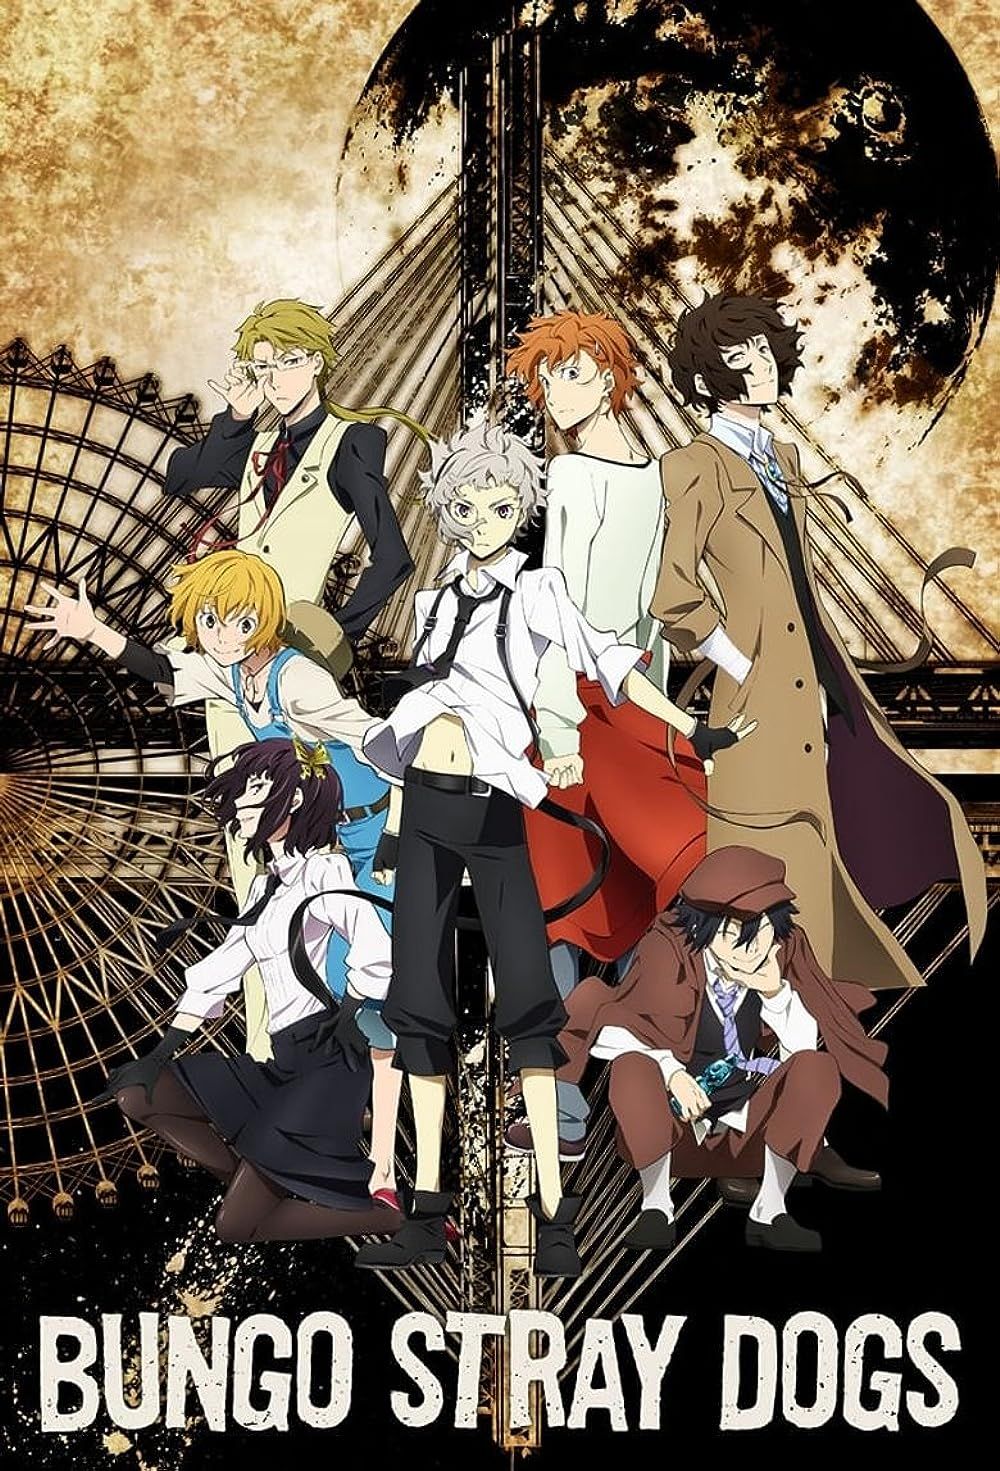 Atsushi surrounded by the detectives in the Bungou Stray Dogs poster